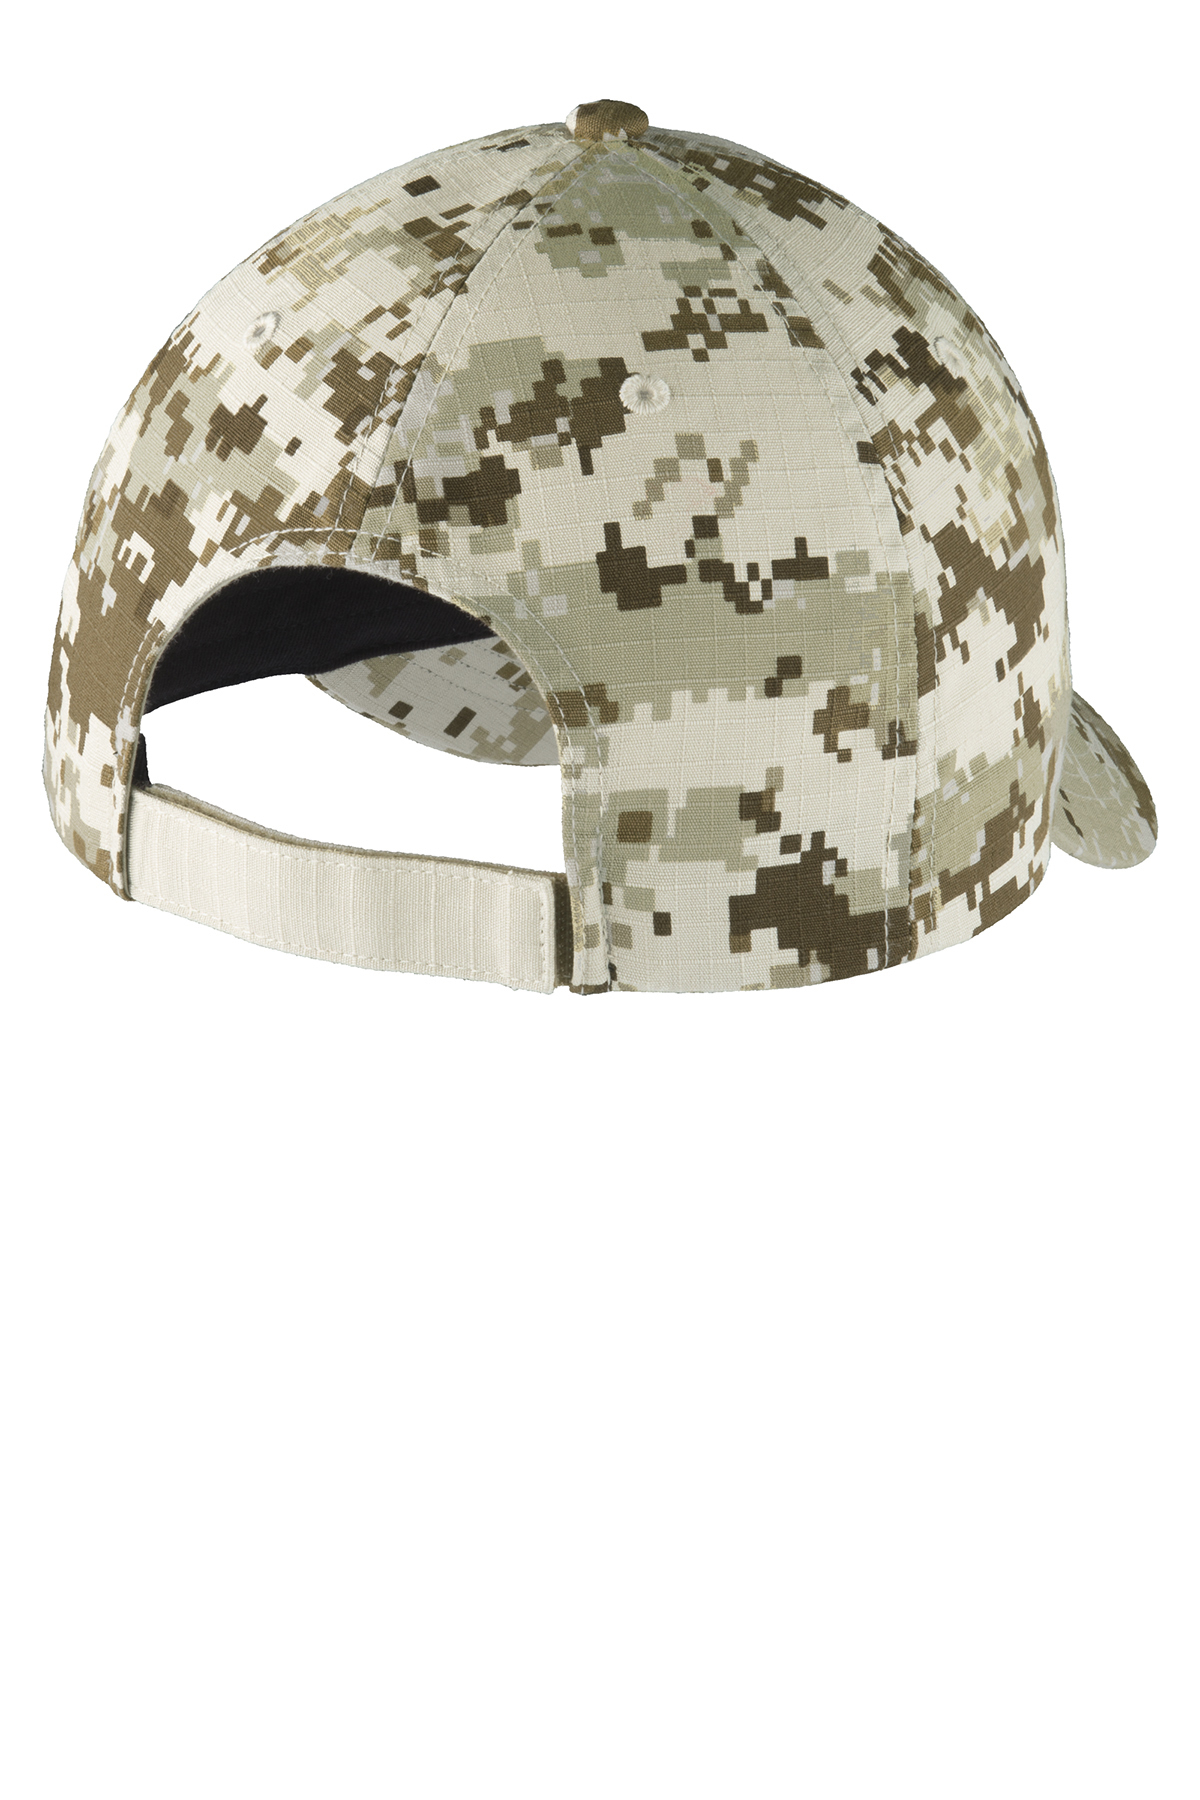 Size 58 Details about   Italian digital camouflage hats.Ripstop fabric